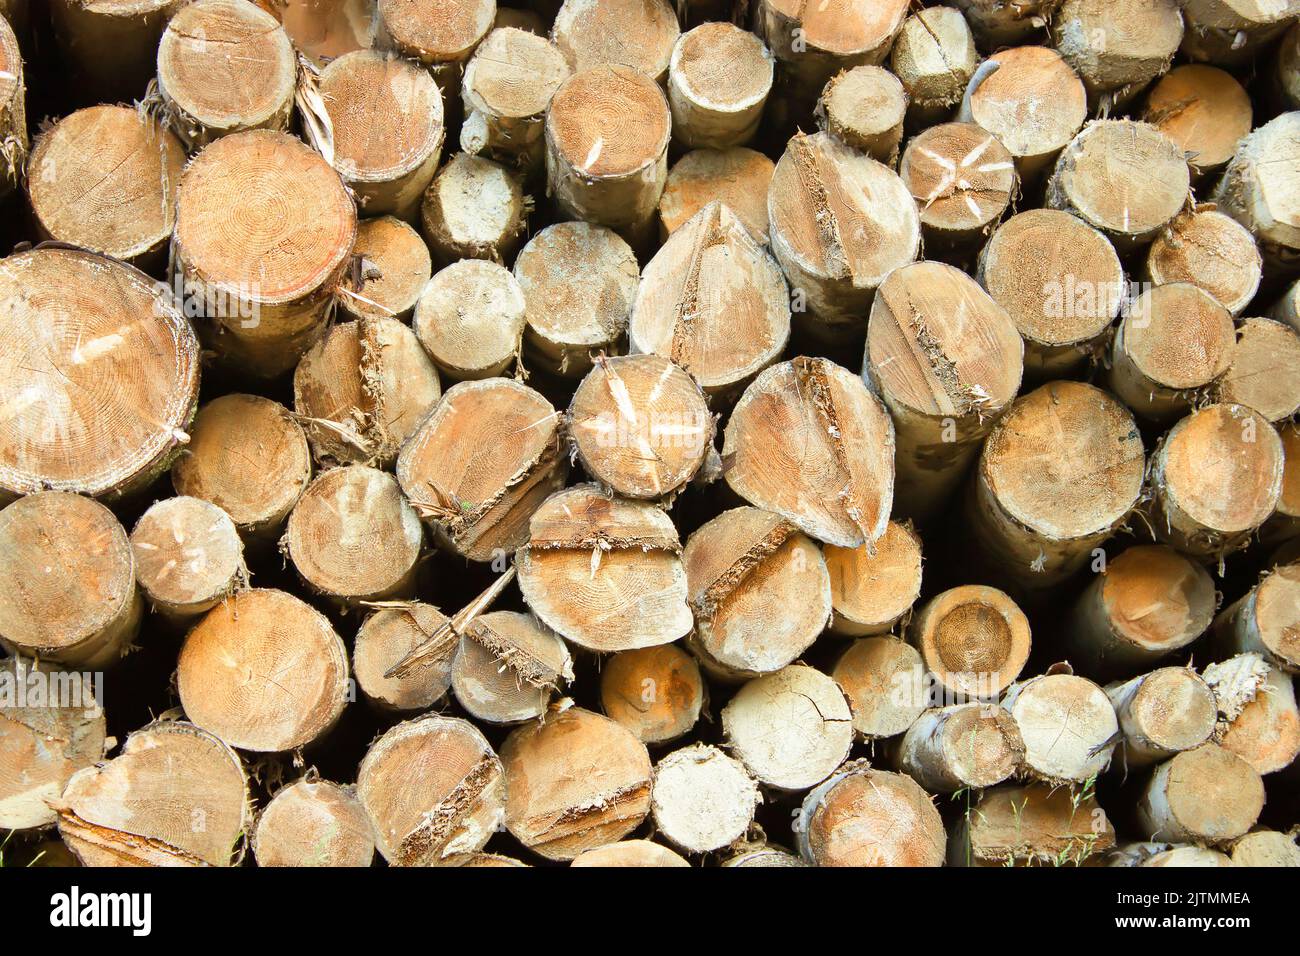 the stack of the dry firewood for furnace kindling Stock Photo